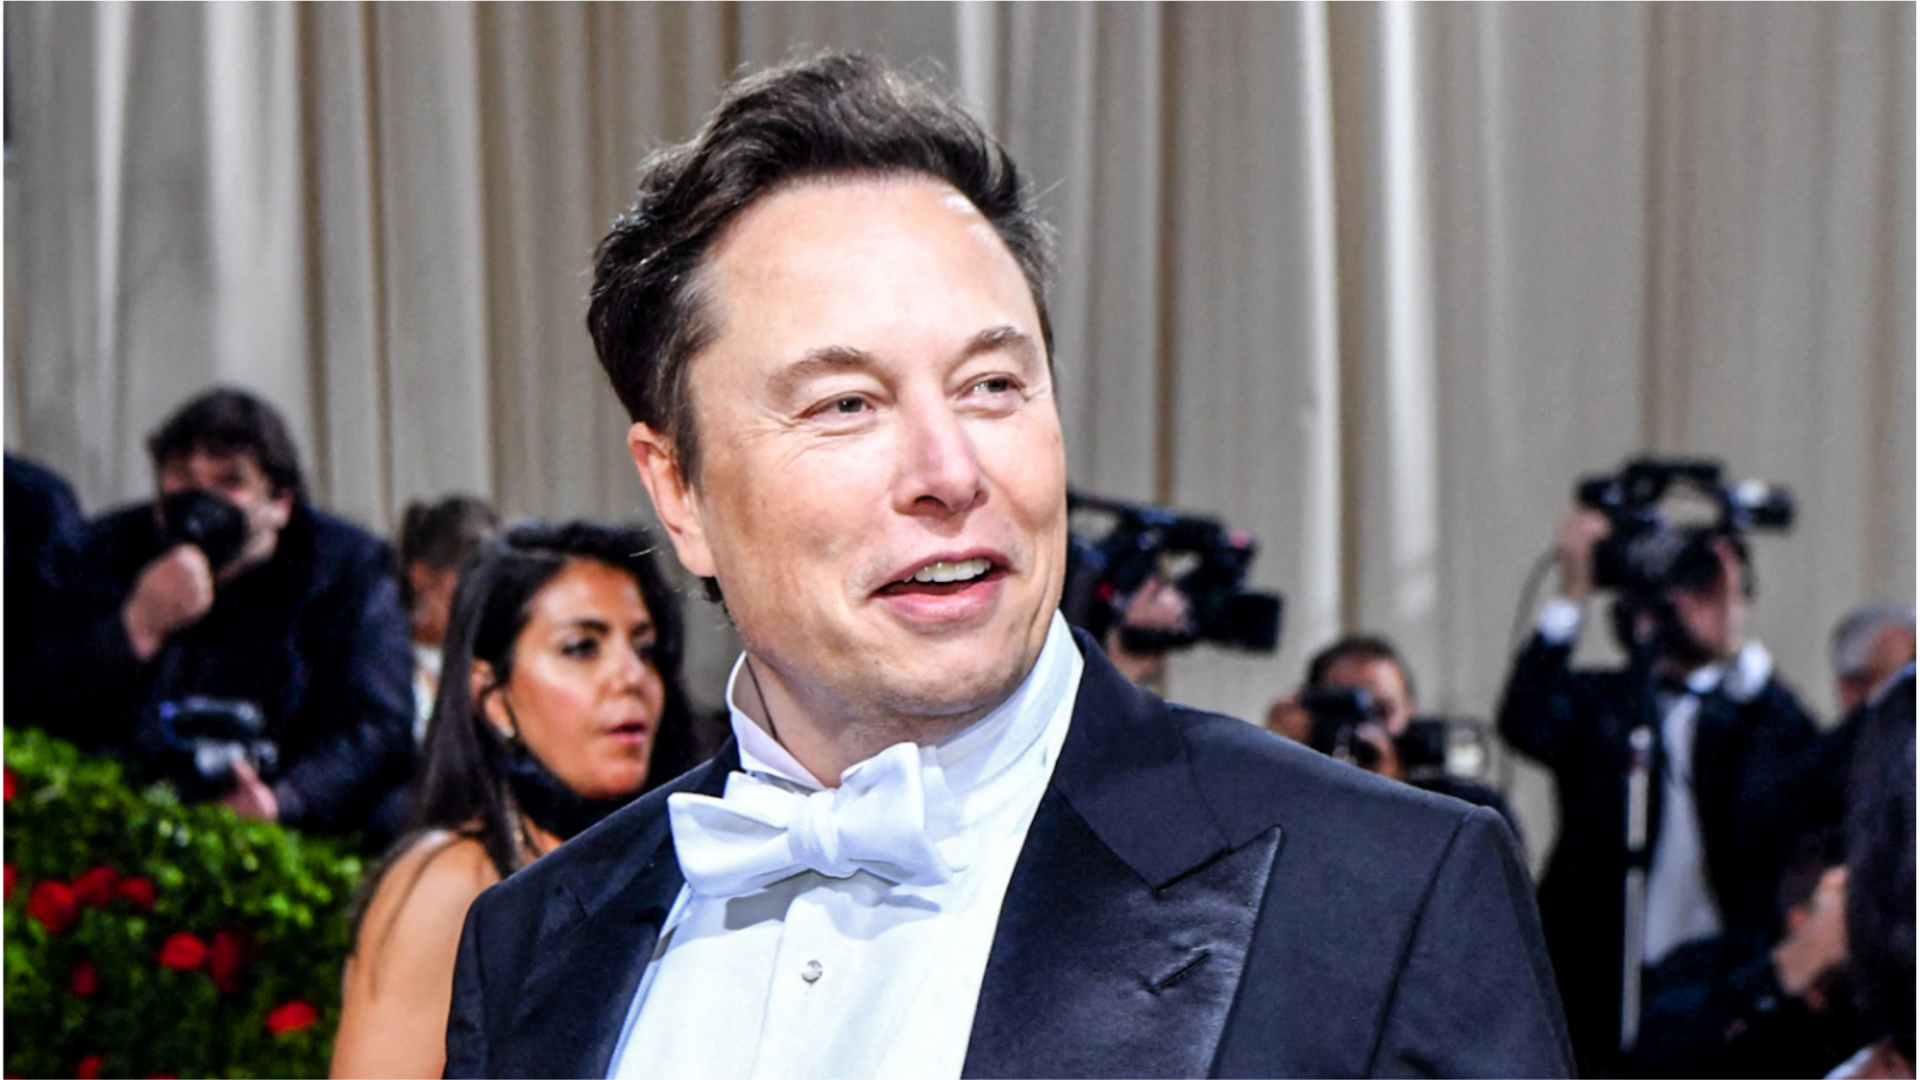 Fox Gives Prime Time Show to Elon Musk